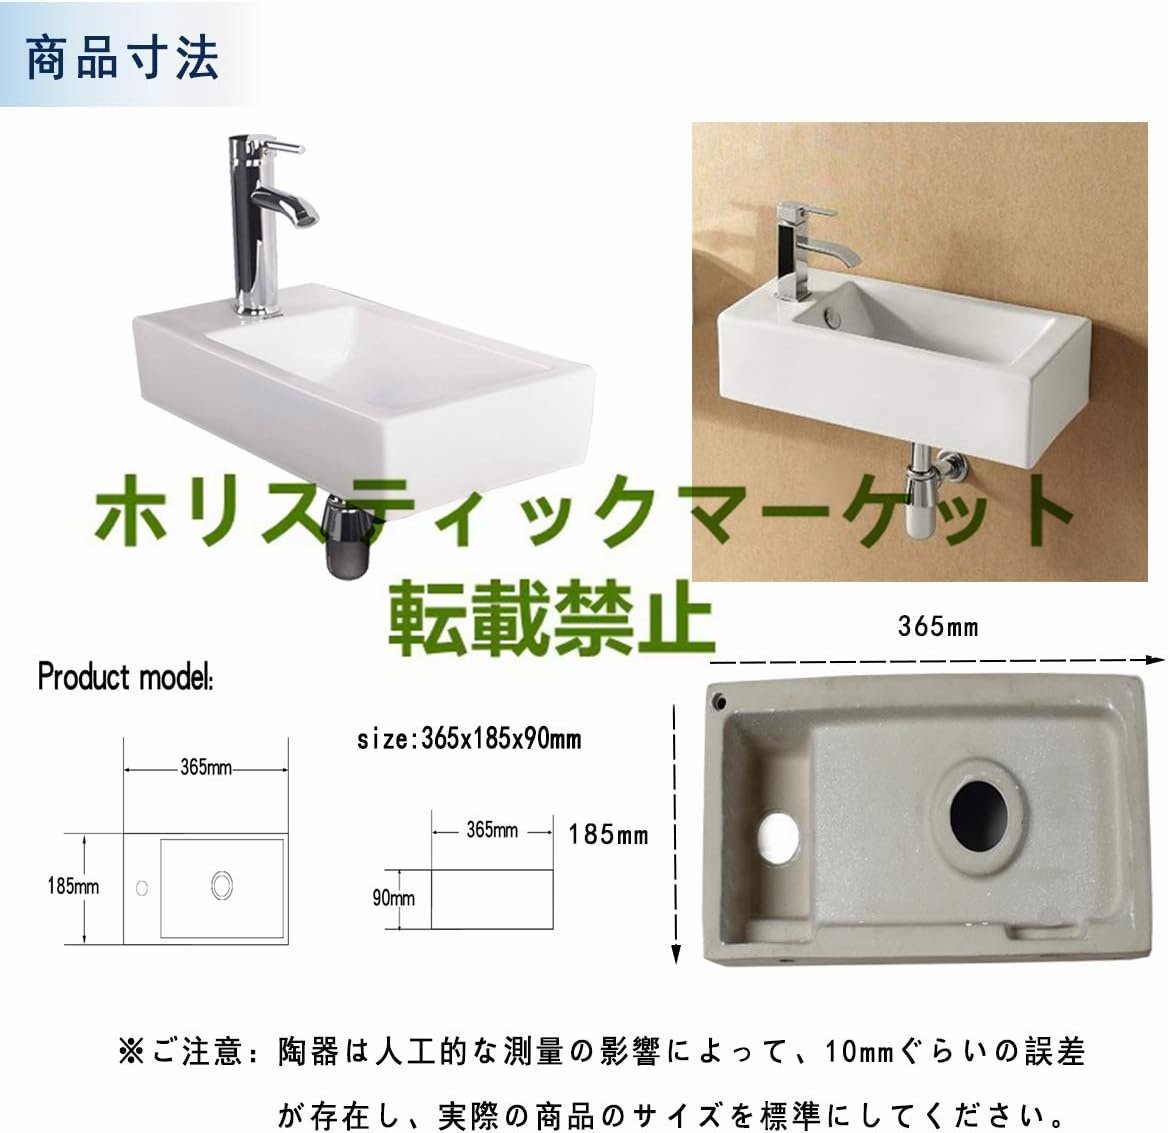  new goods arrival Ferrie moa wall hanging wash-basin small size hand . pot toilet . lavatory reform modified equipment space-saving ( white )